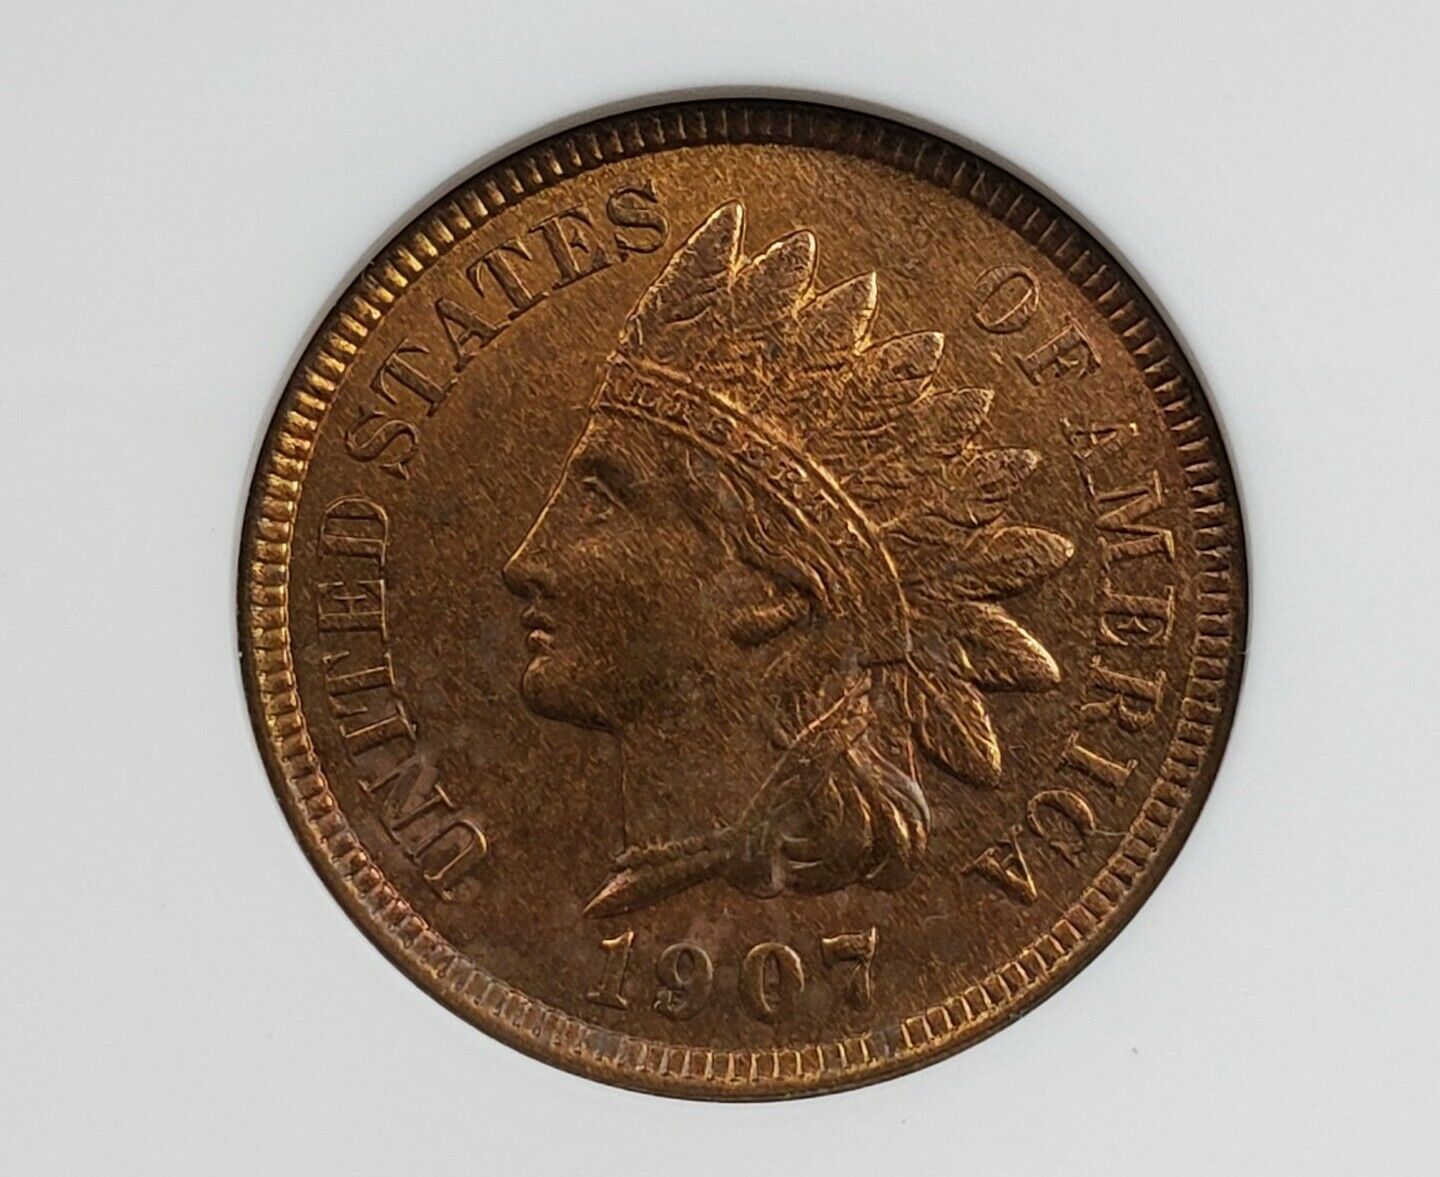 1907 P Indian Cent Penny Coin ANACS Unc Details RPD S-28 Repunched Date